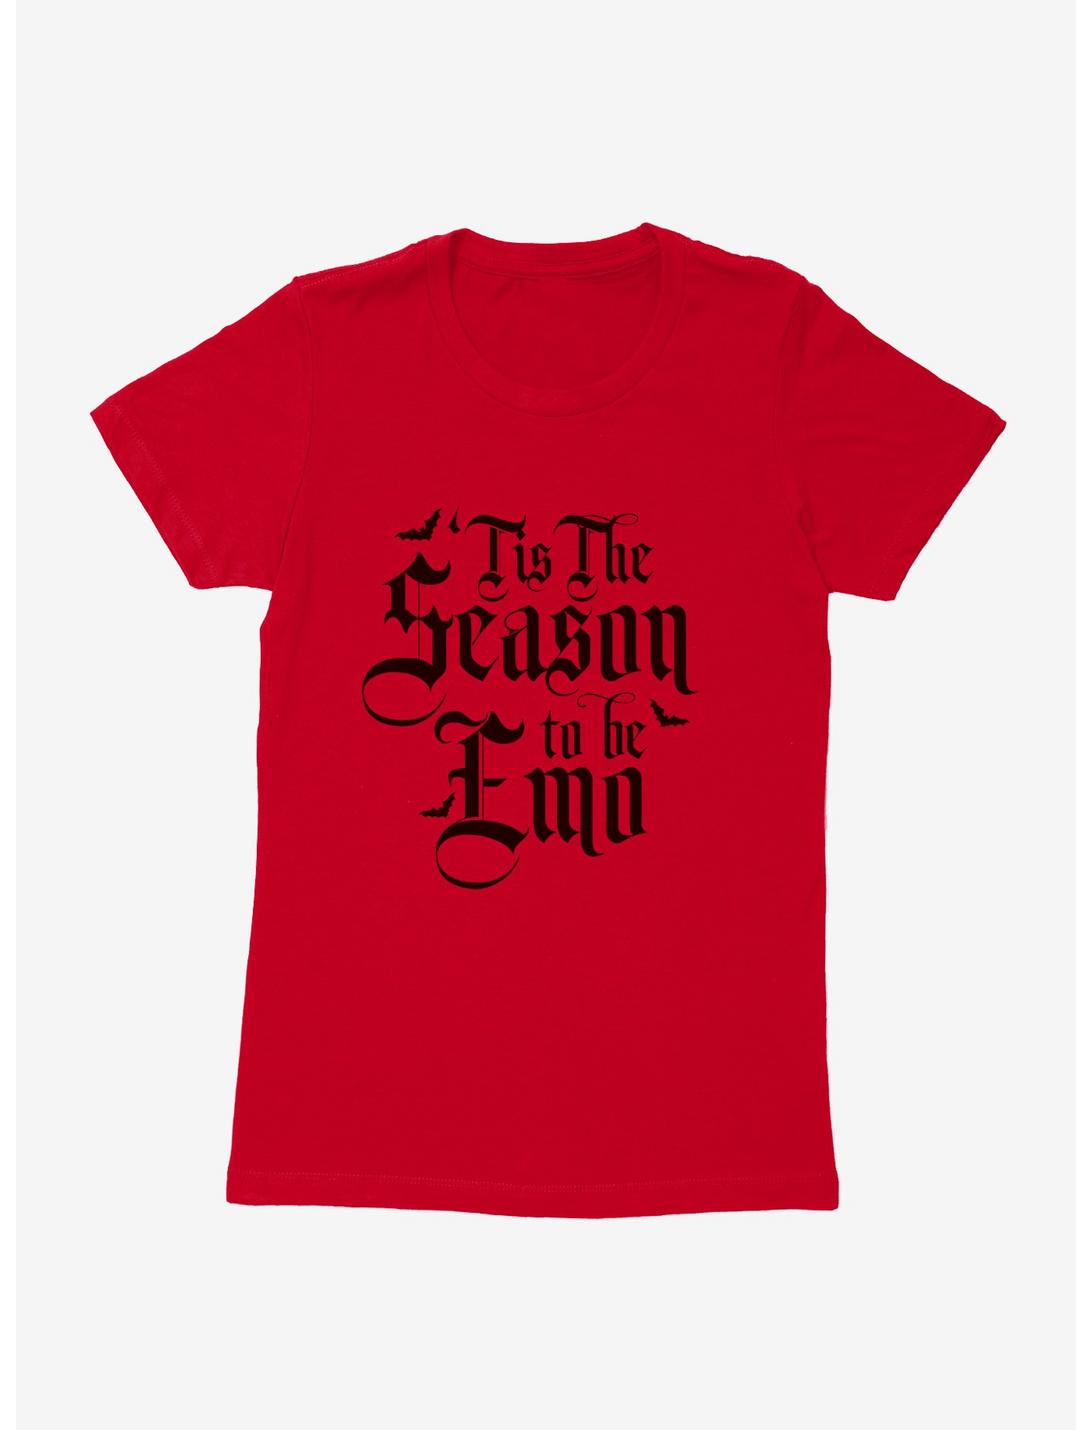 Tis The Season To Be Emo Womens T-Shirt, RED, hi-res